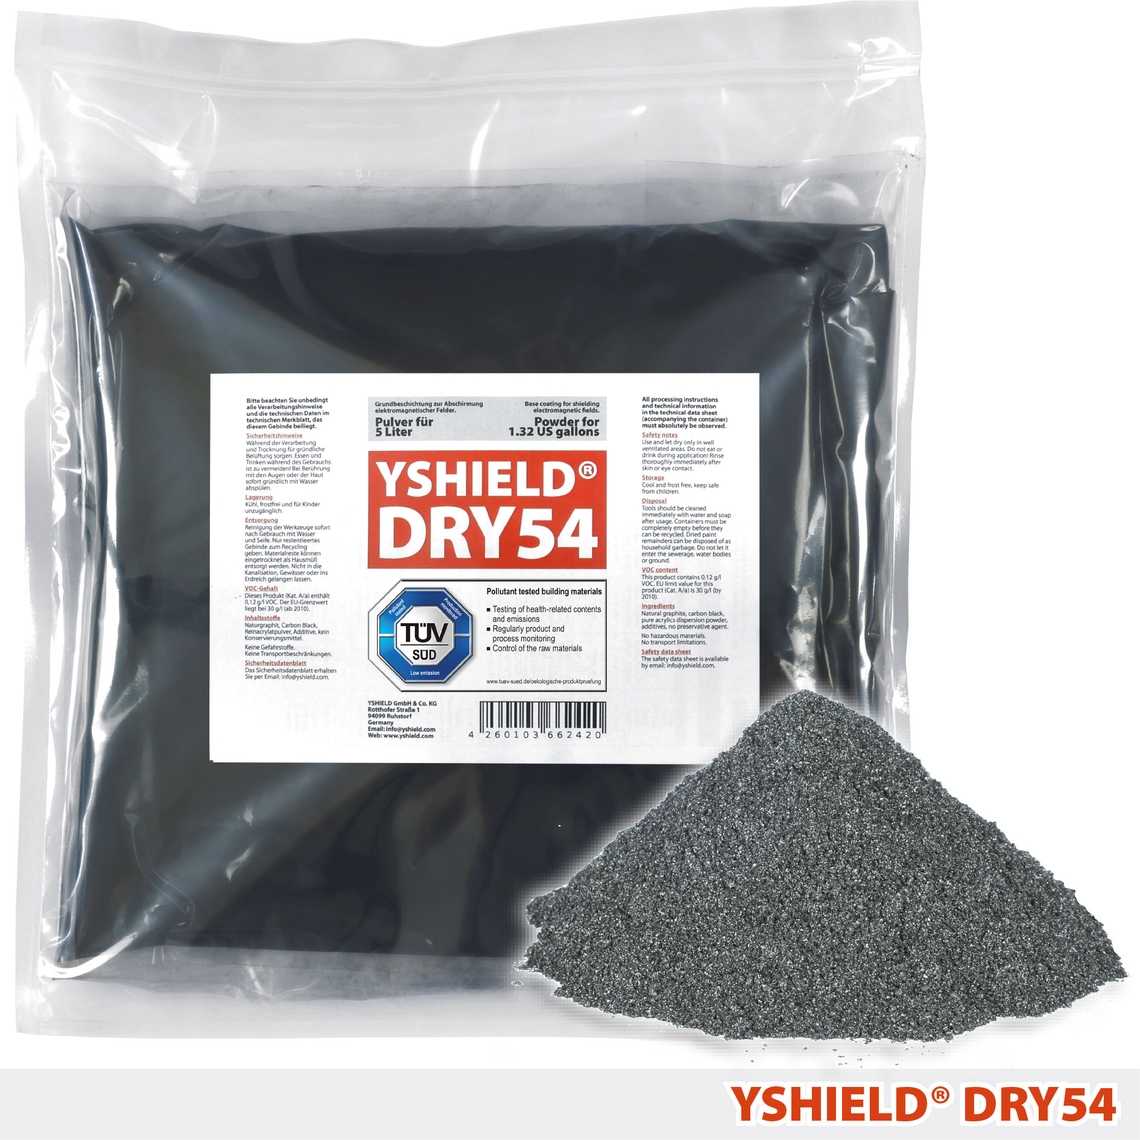 YSHIELD® DRY54 | Special shielding paint | Powder for 5 liter